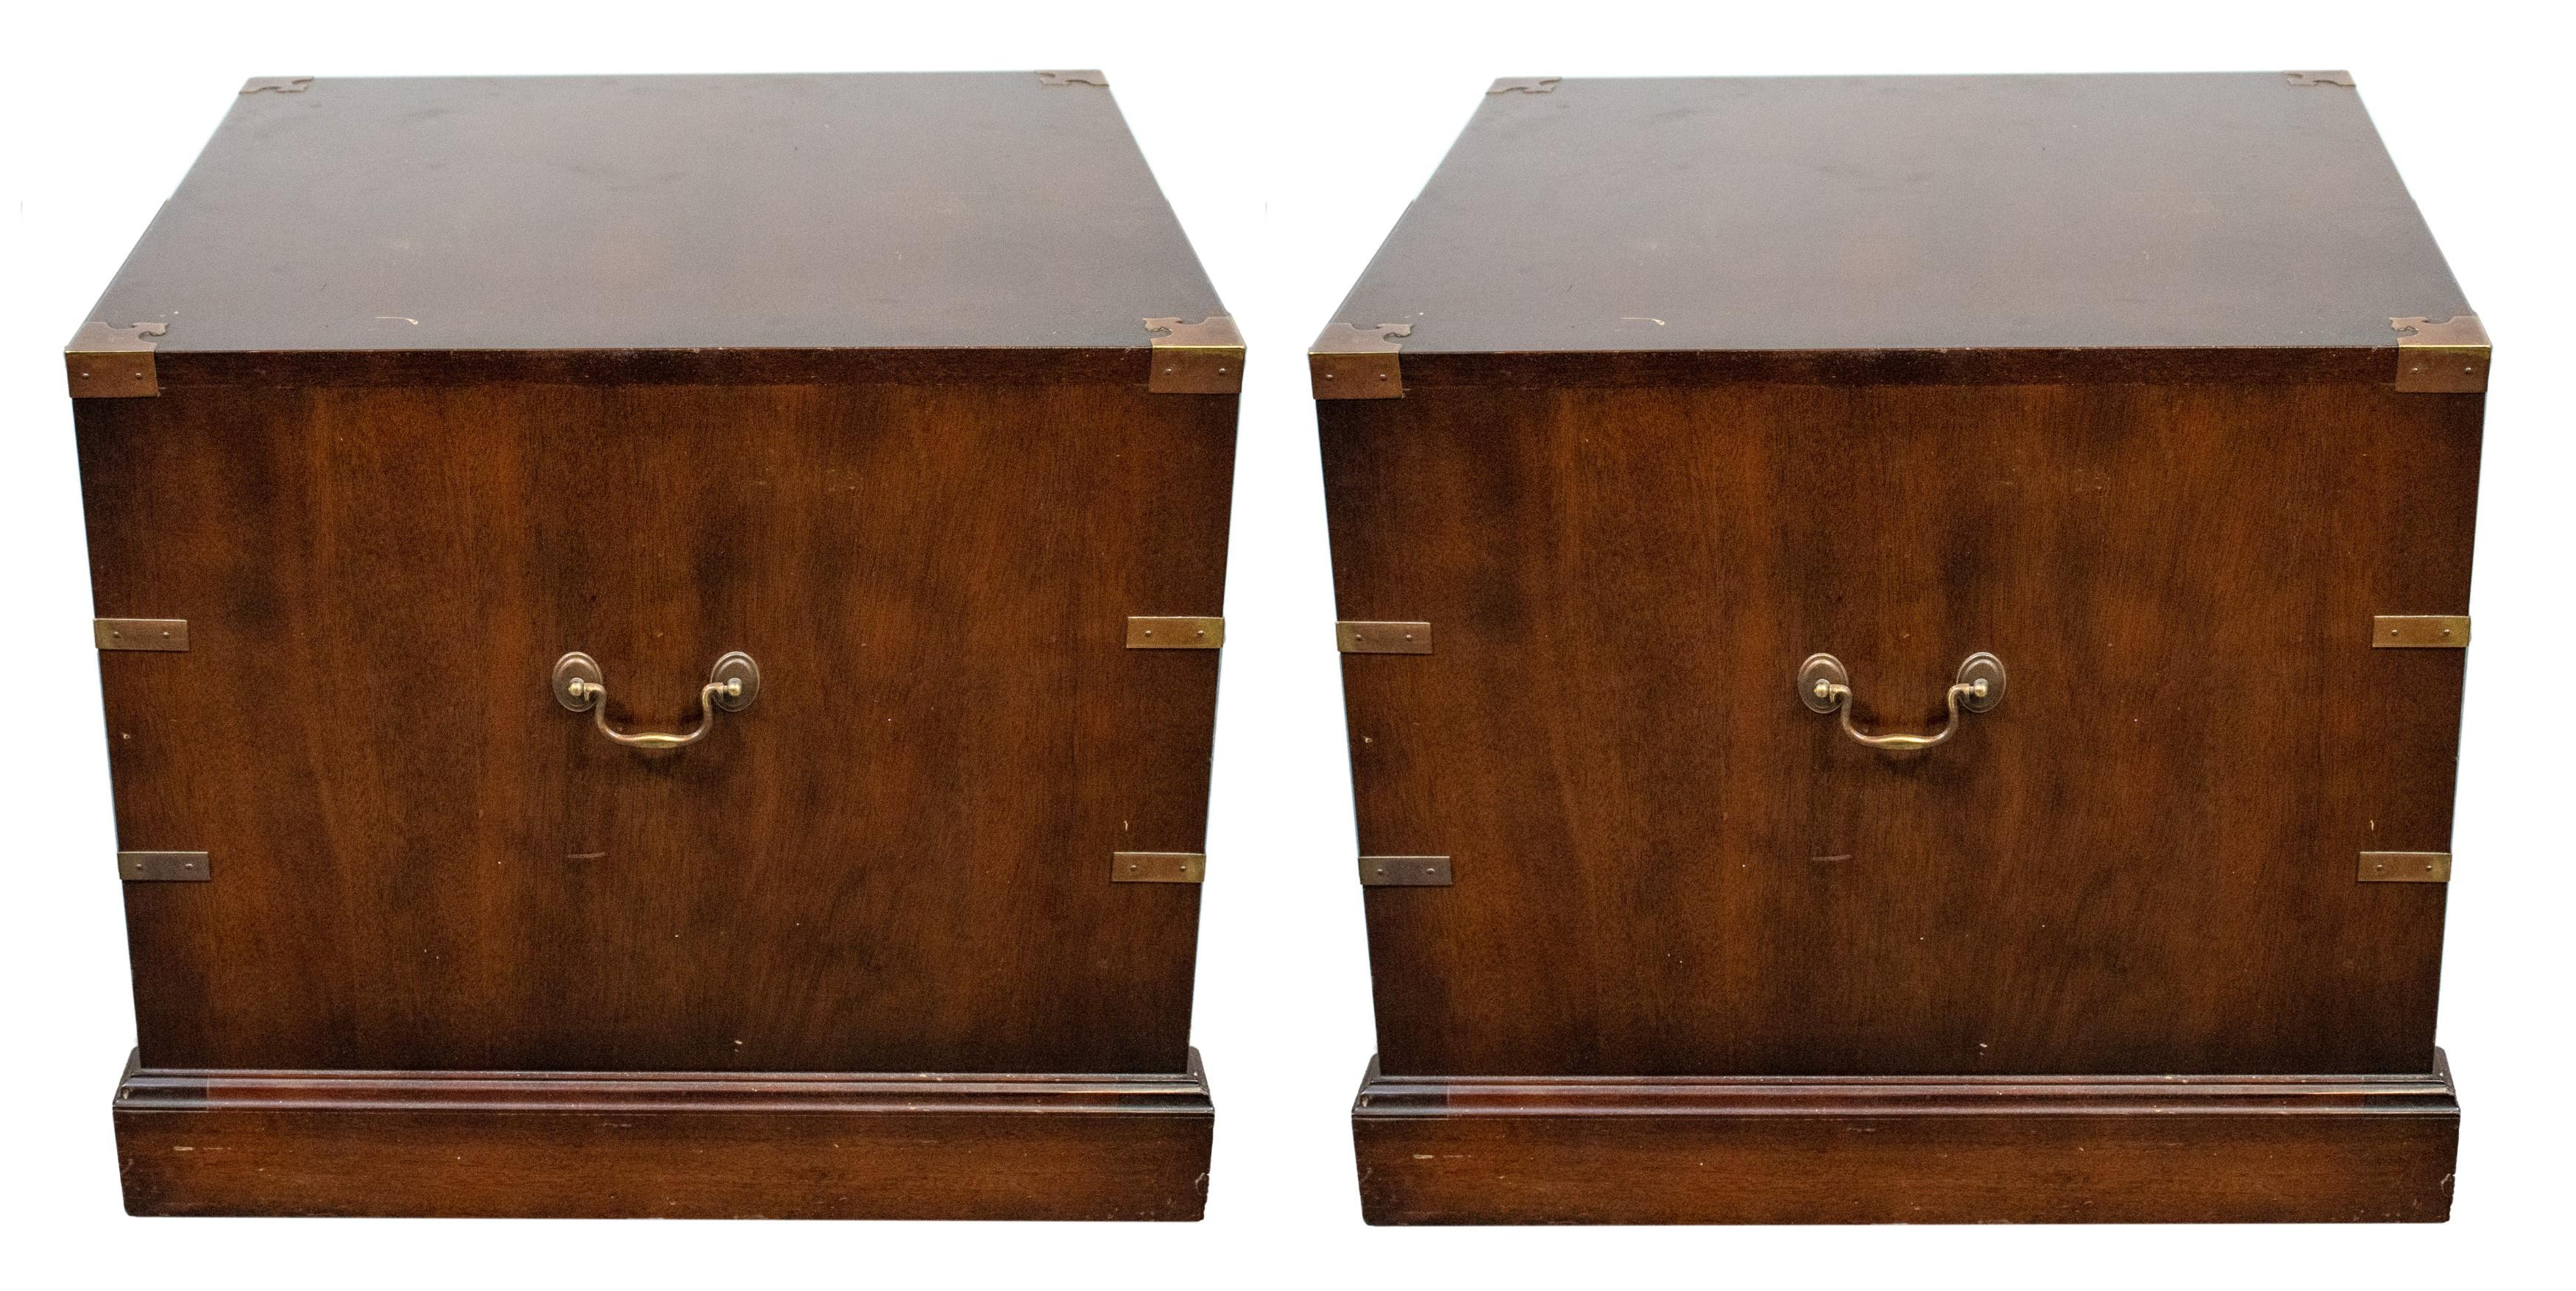 English mahogany campaign chests with three drawers each. Here's the information:

Style: Campaign
Material: Mahogany
Features:
Three drawers
Brass mounted
Swing pulls
Handles at the sides for portability
Dimensions (for each chest):
Height (H): 22